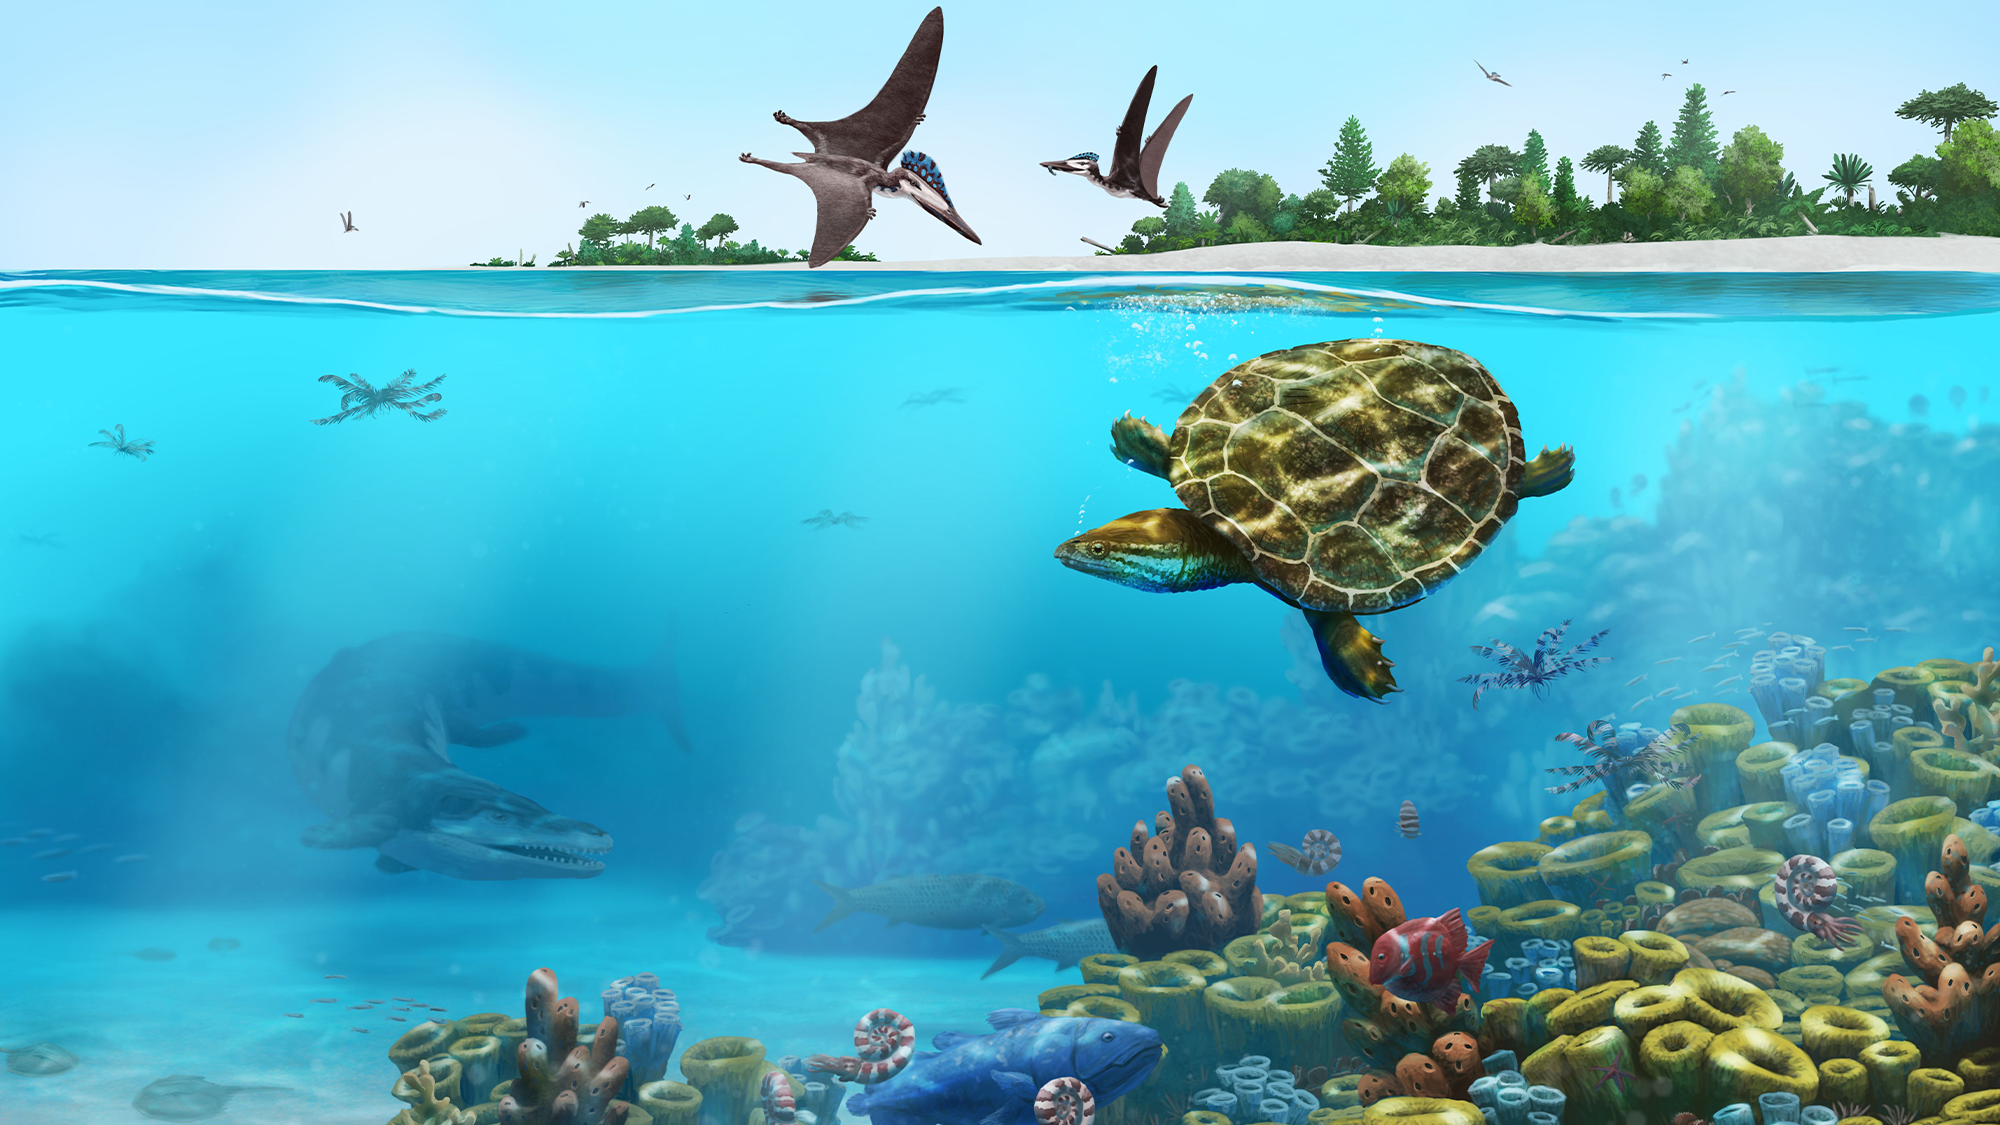 An artist’s impression of Solnhofia parsonsi’s environment in an Upper Jurassic lagoon 150 million years ago in what is now Lower Bavaria. The turtle swims in a shallow body of water, with fish swimming near it and pterosaurs flying above.